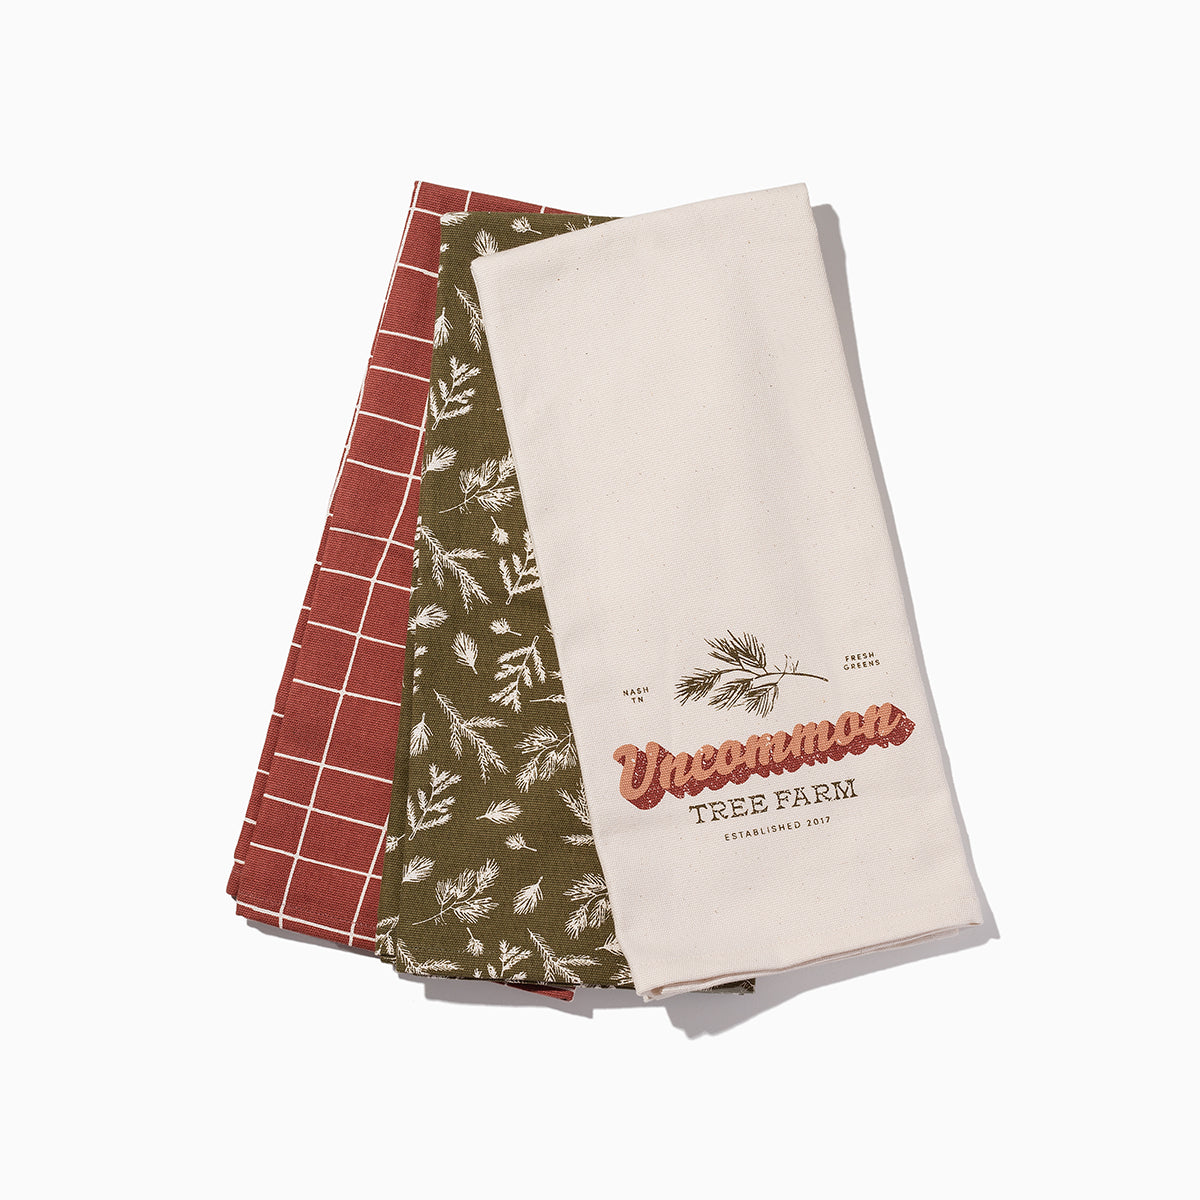 Tree Farm Dish Towels (Set of 3) | Product Image | Uncommon James Home